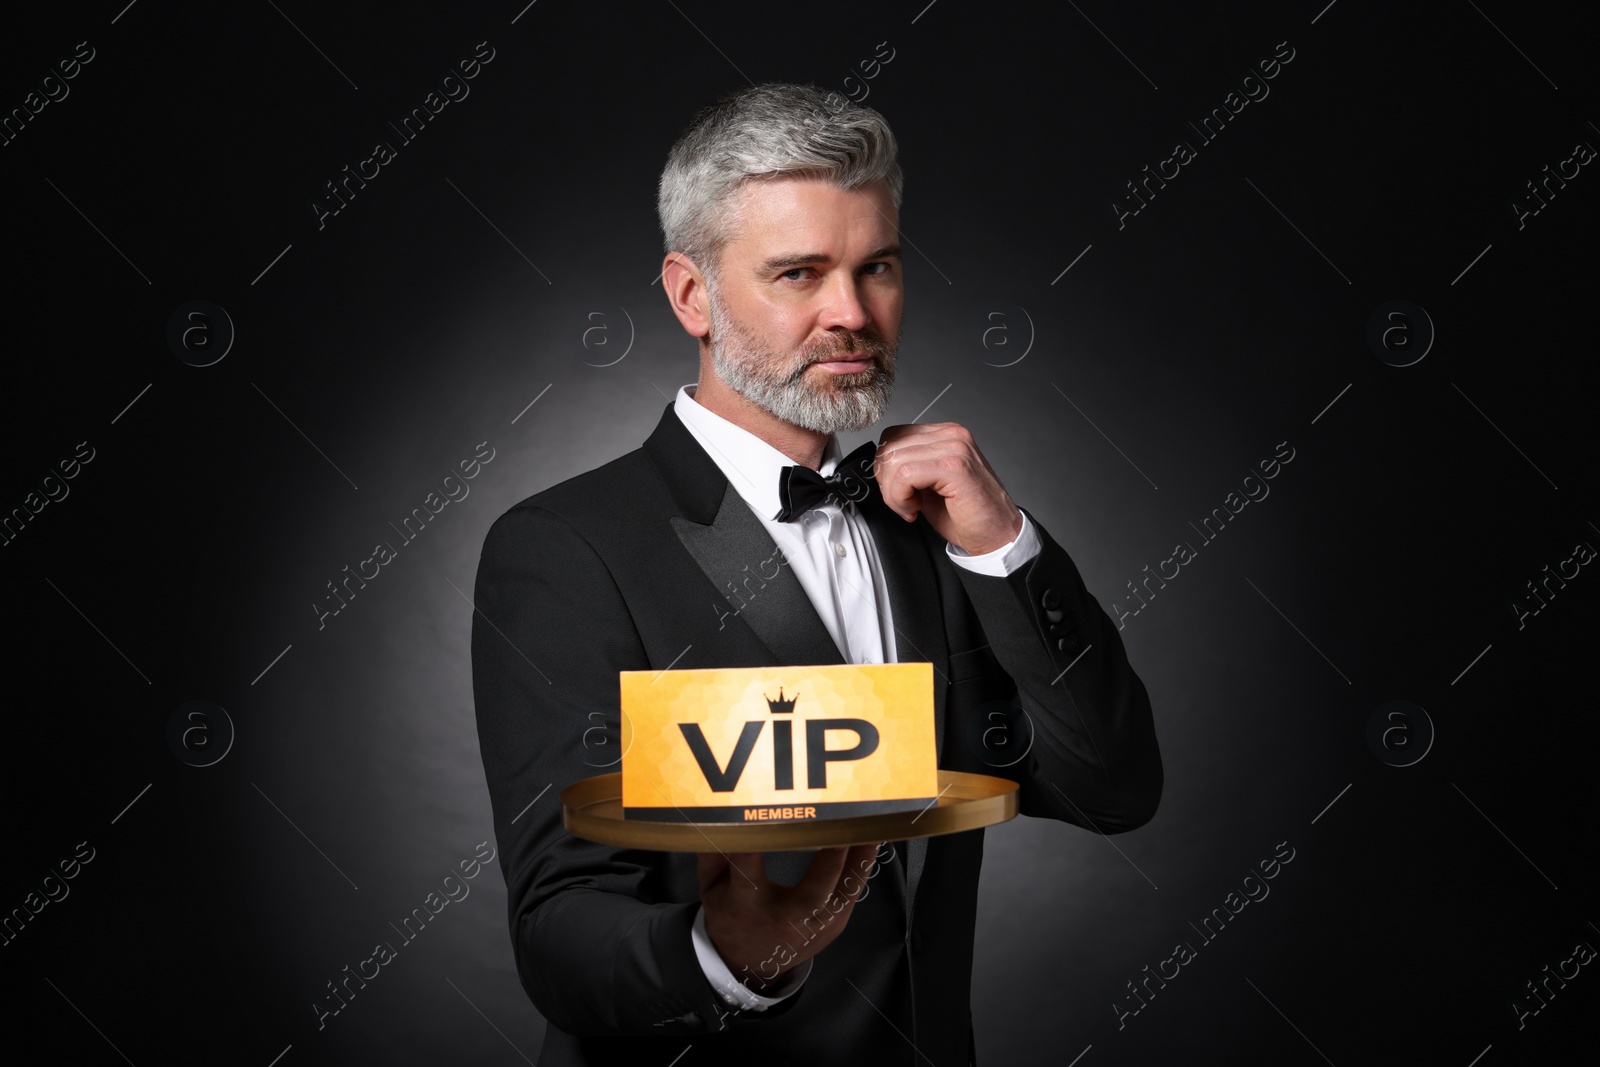 Photo of Handsome man holding tray with VIP sign on black background